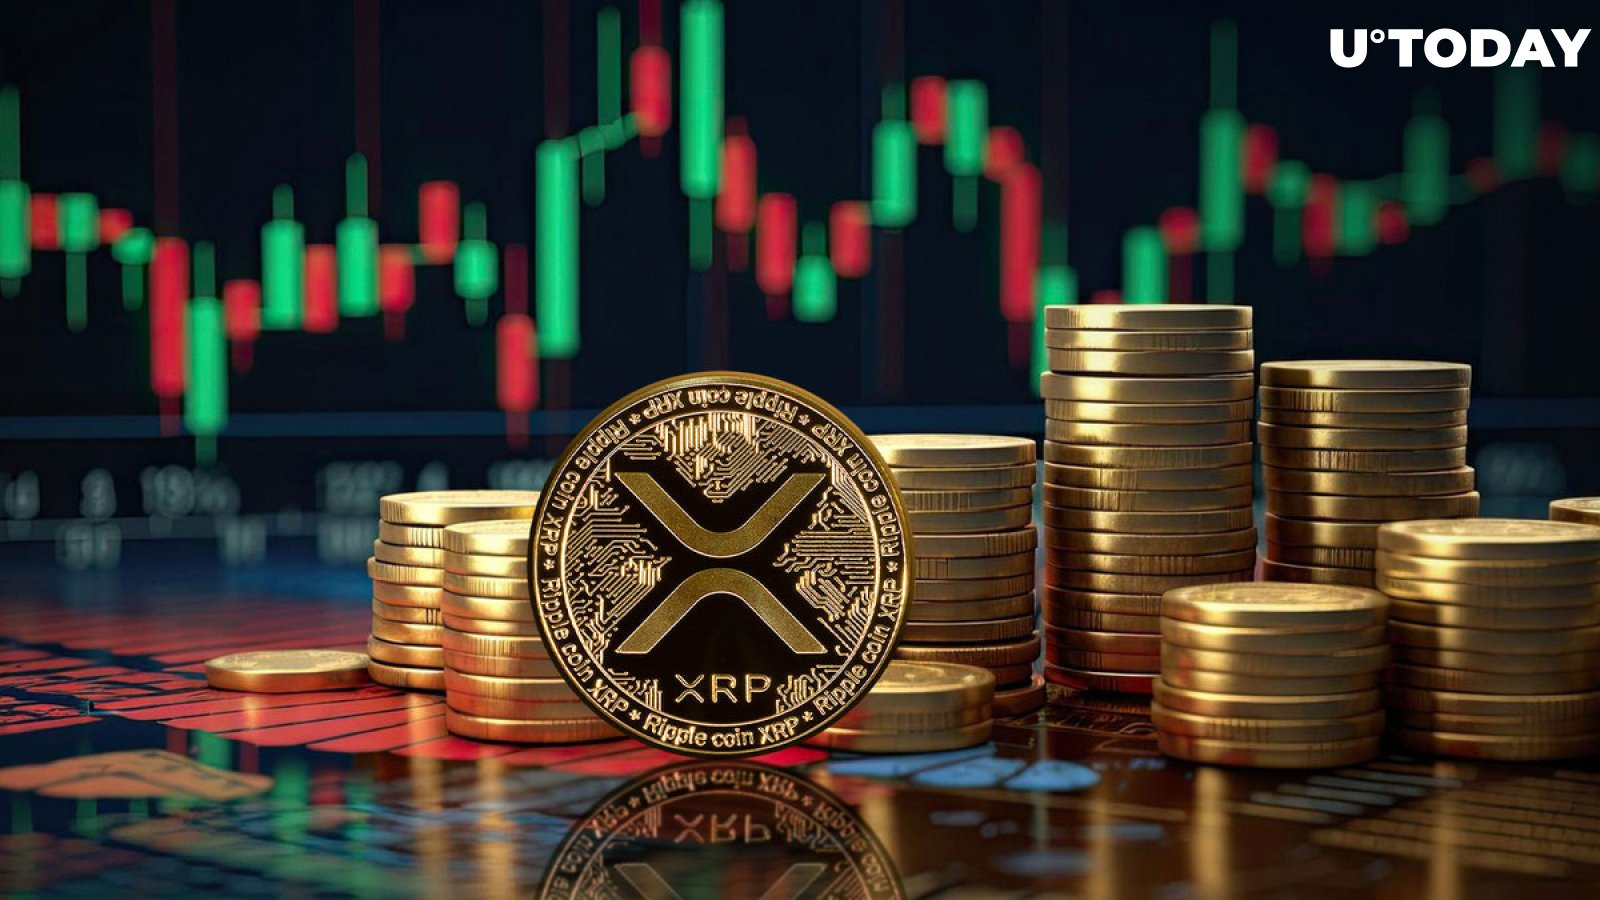 March Madness for XRP: $2.2 Billion Market Cap Boost Raises Eyebrows